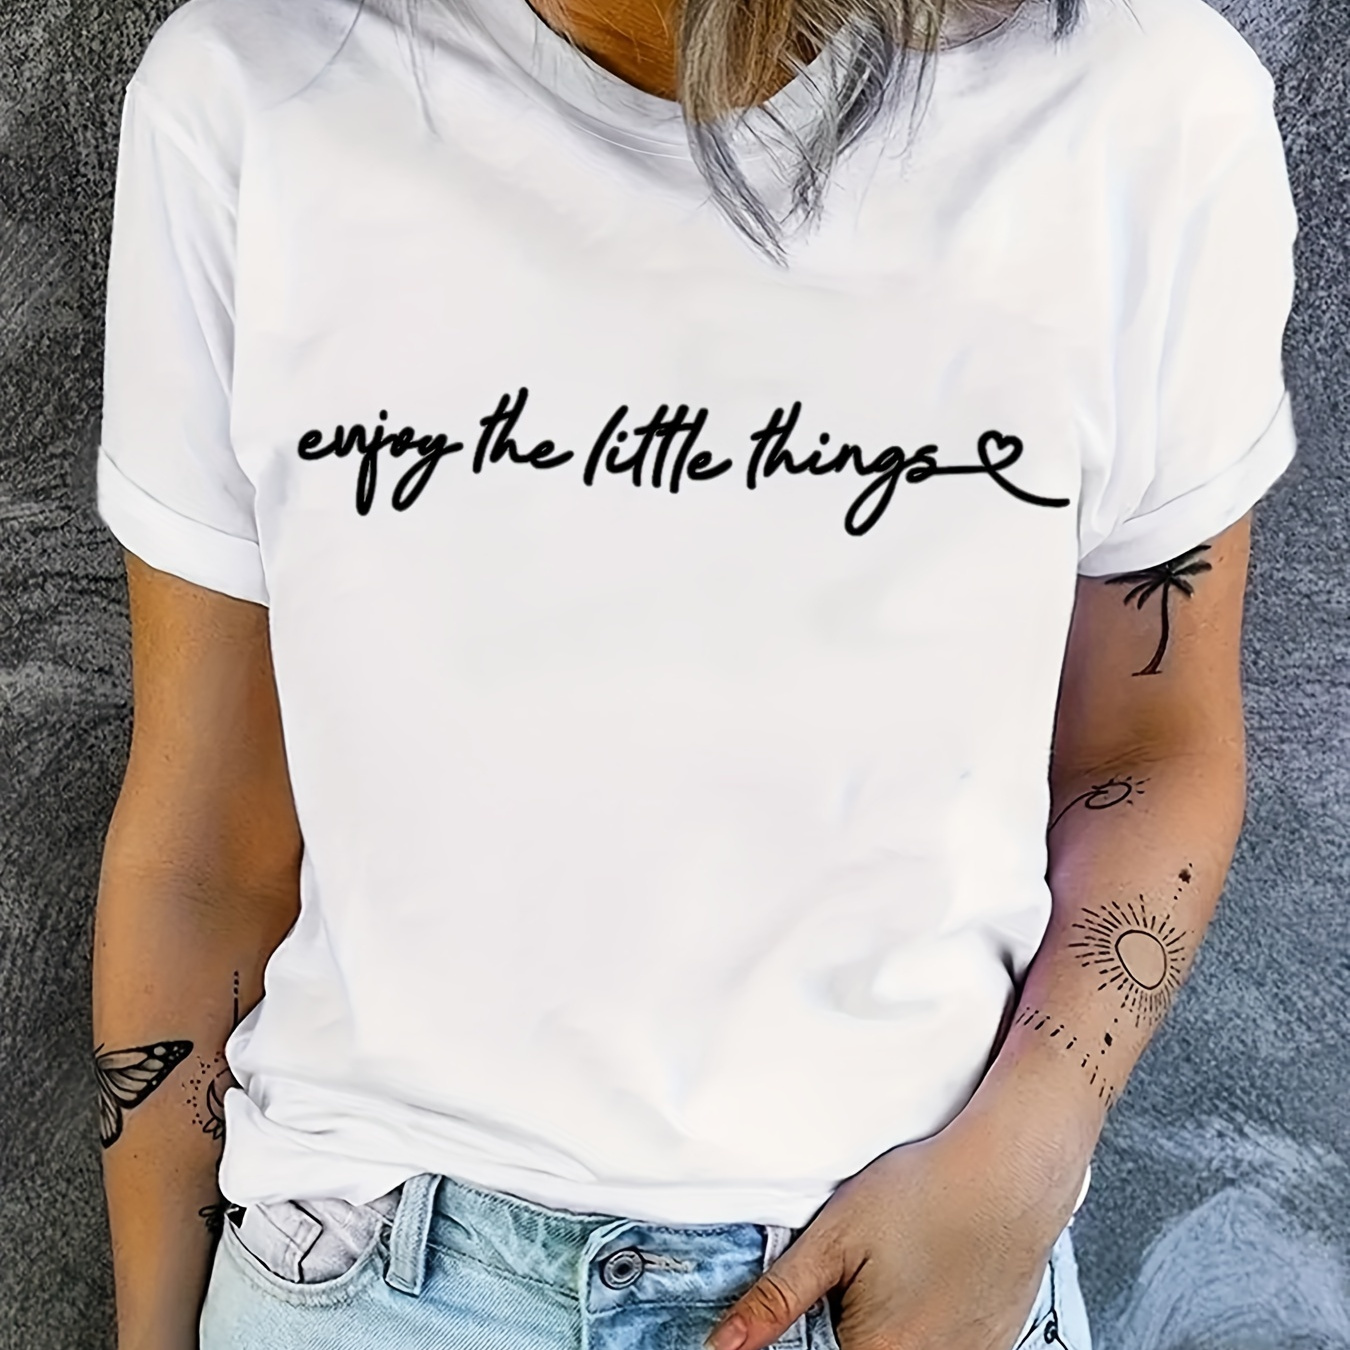 

Enjoy The Litlle Things Print T-shirt, Short Sleeve Crew Neck Casual Top For Summer & Spring, Women's Clothing